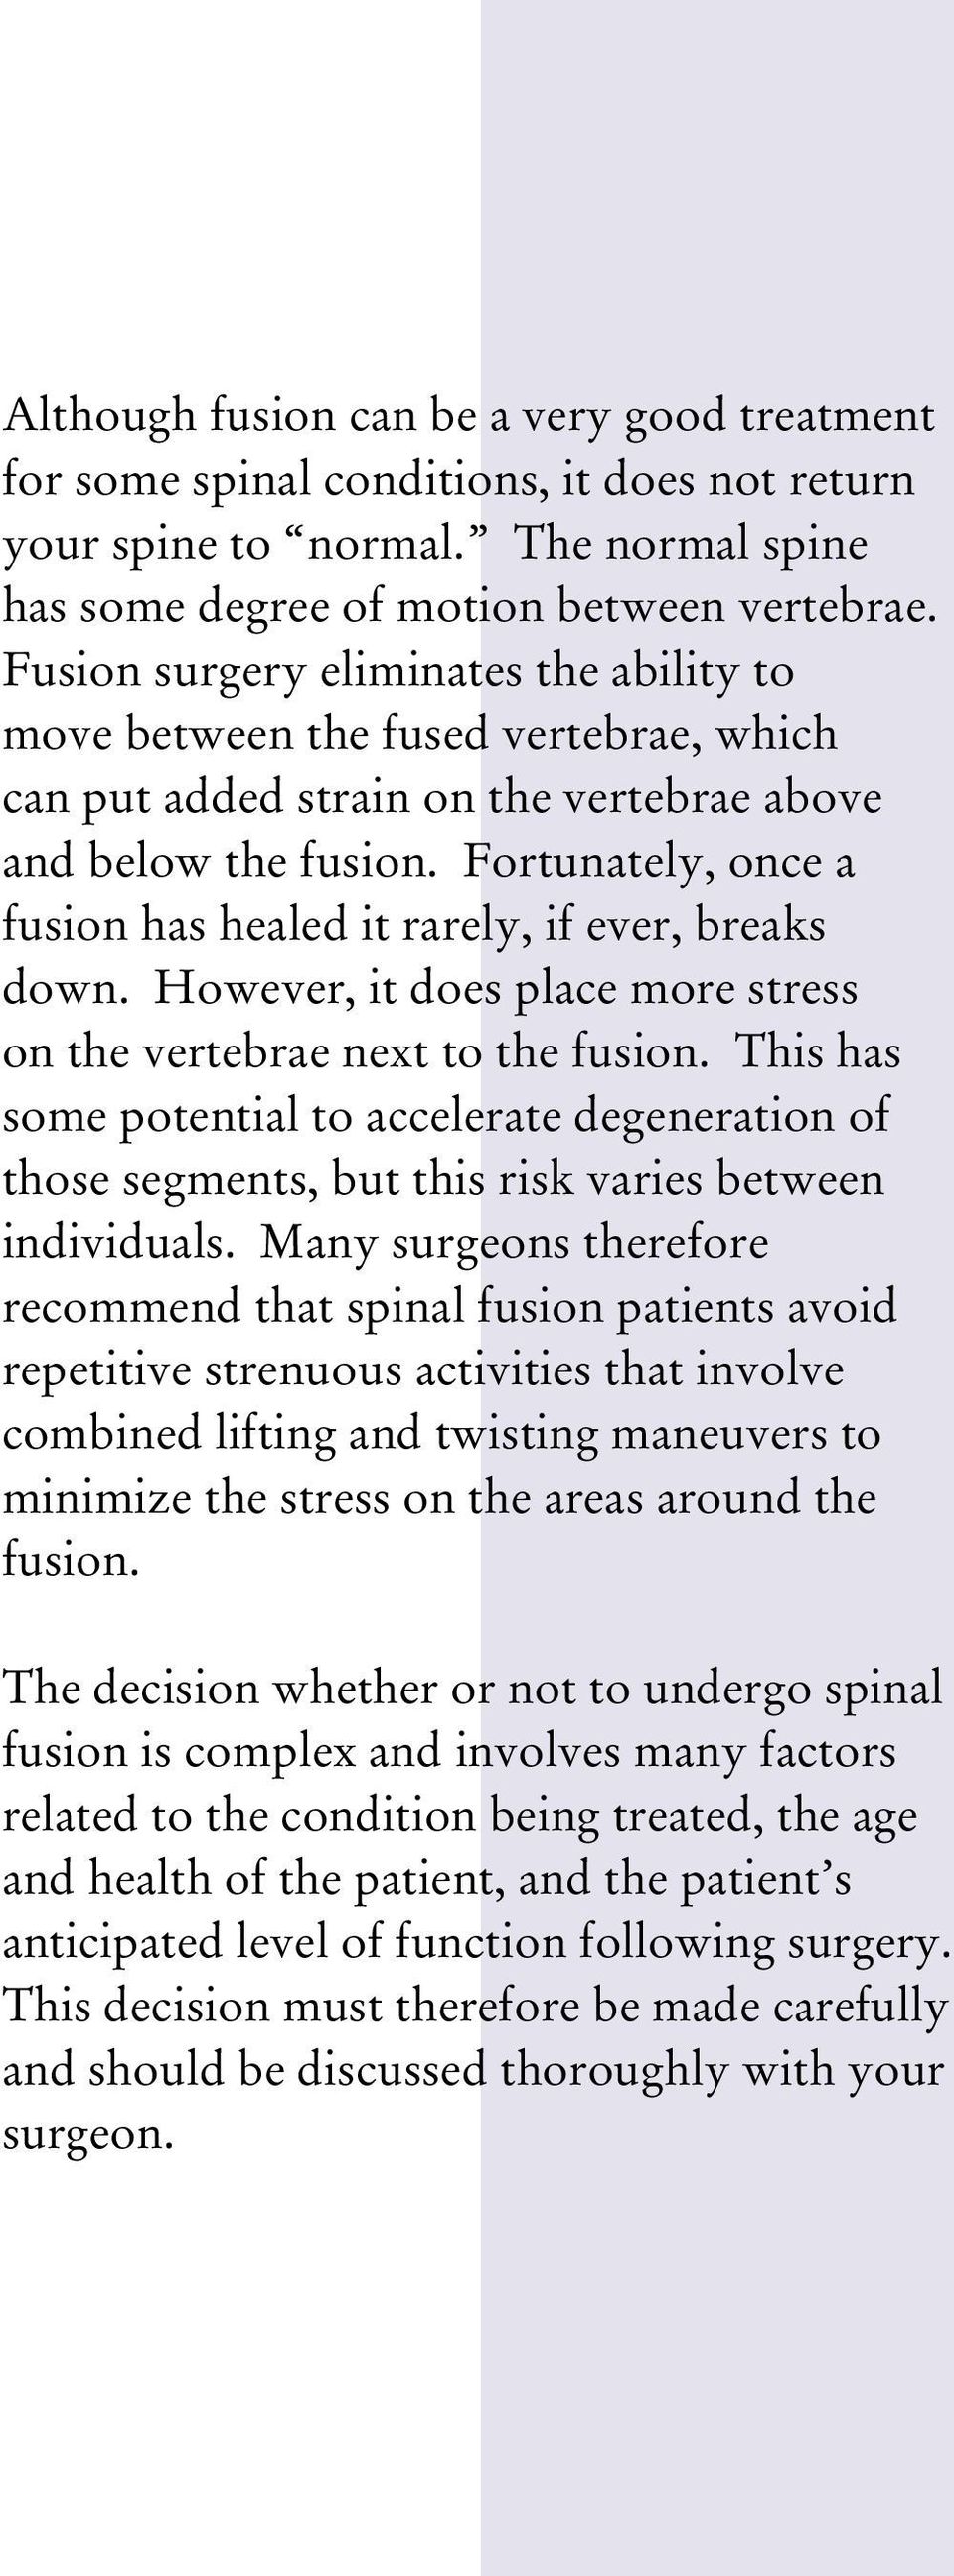 Fortunately, once a fusion has healed it rarely, if ever, breaks down. However, it does place more stress on the vertebrae next to the fusion.